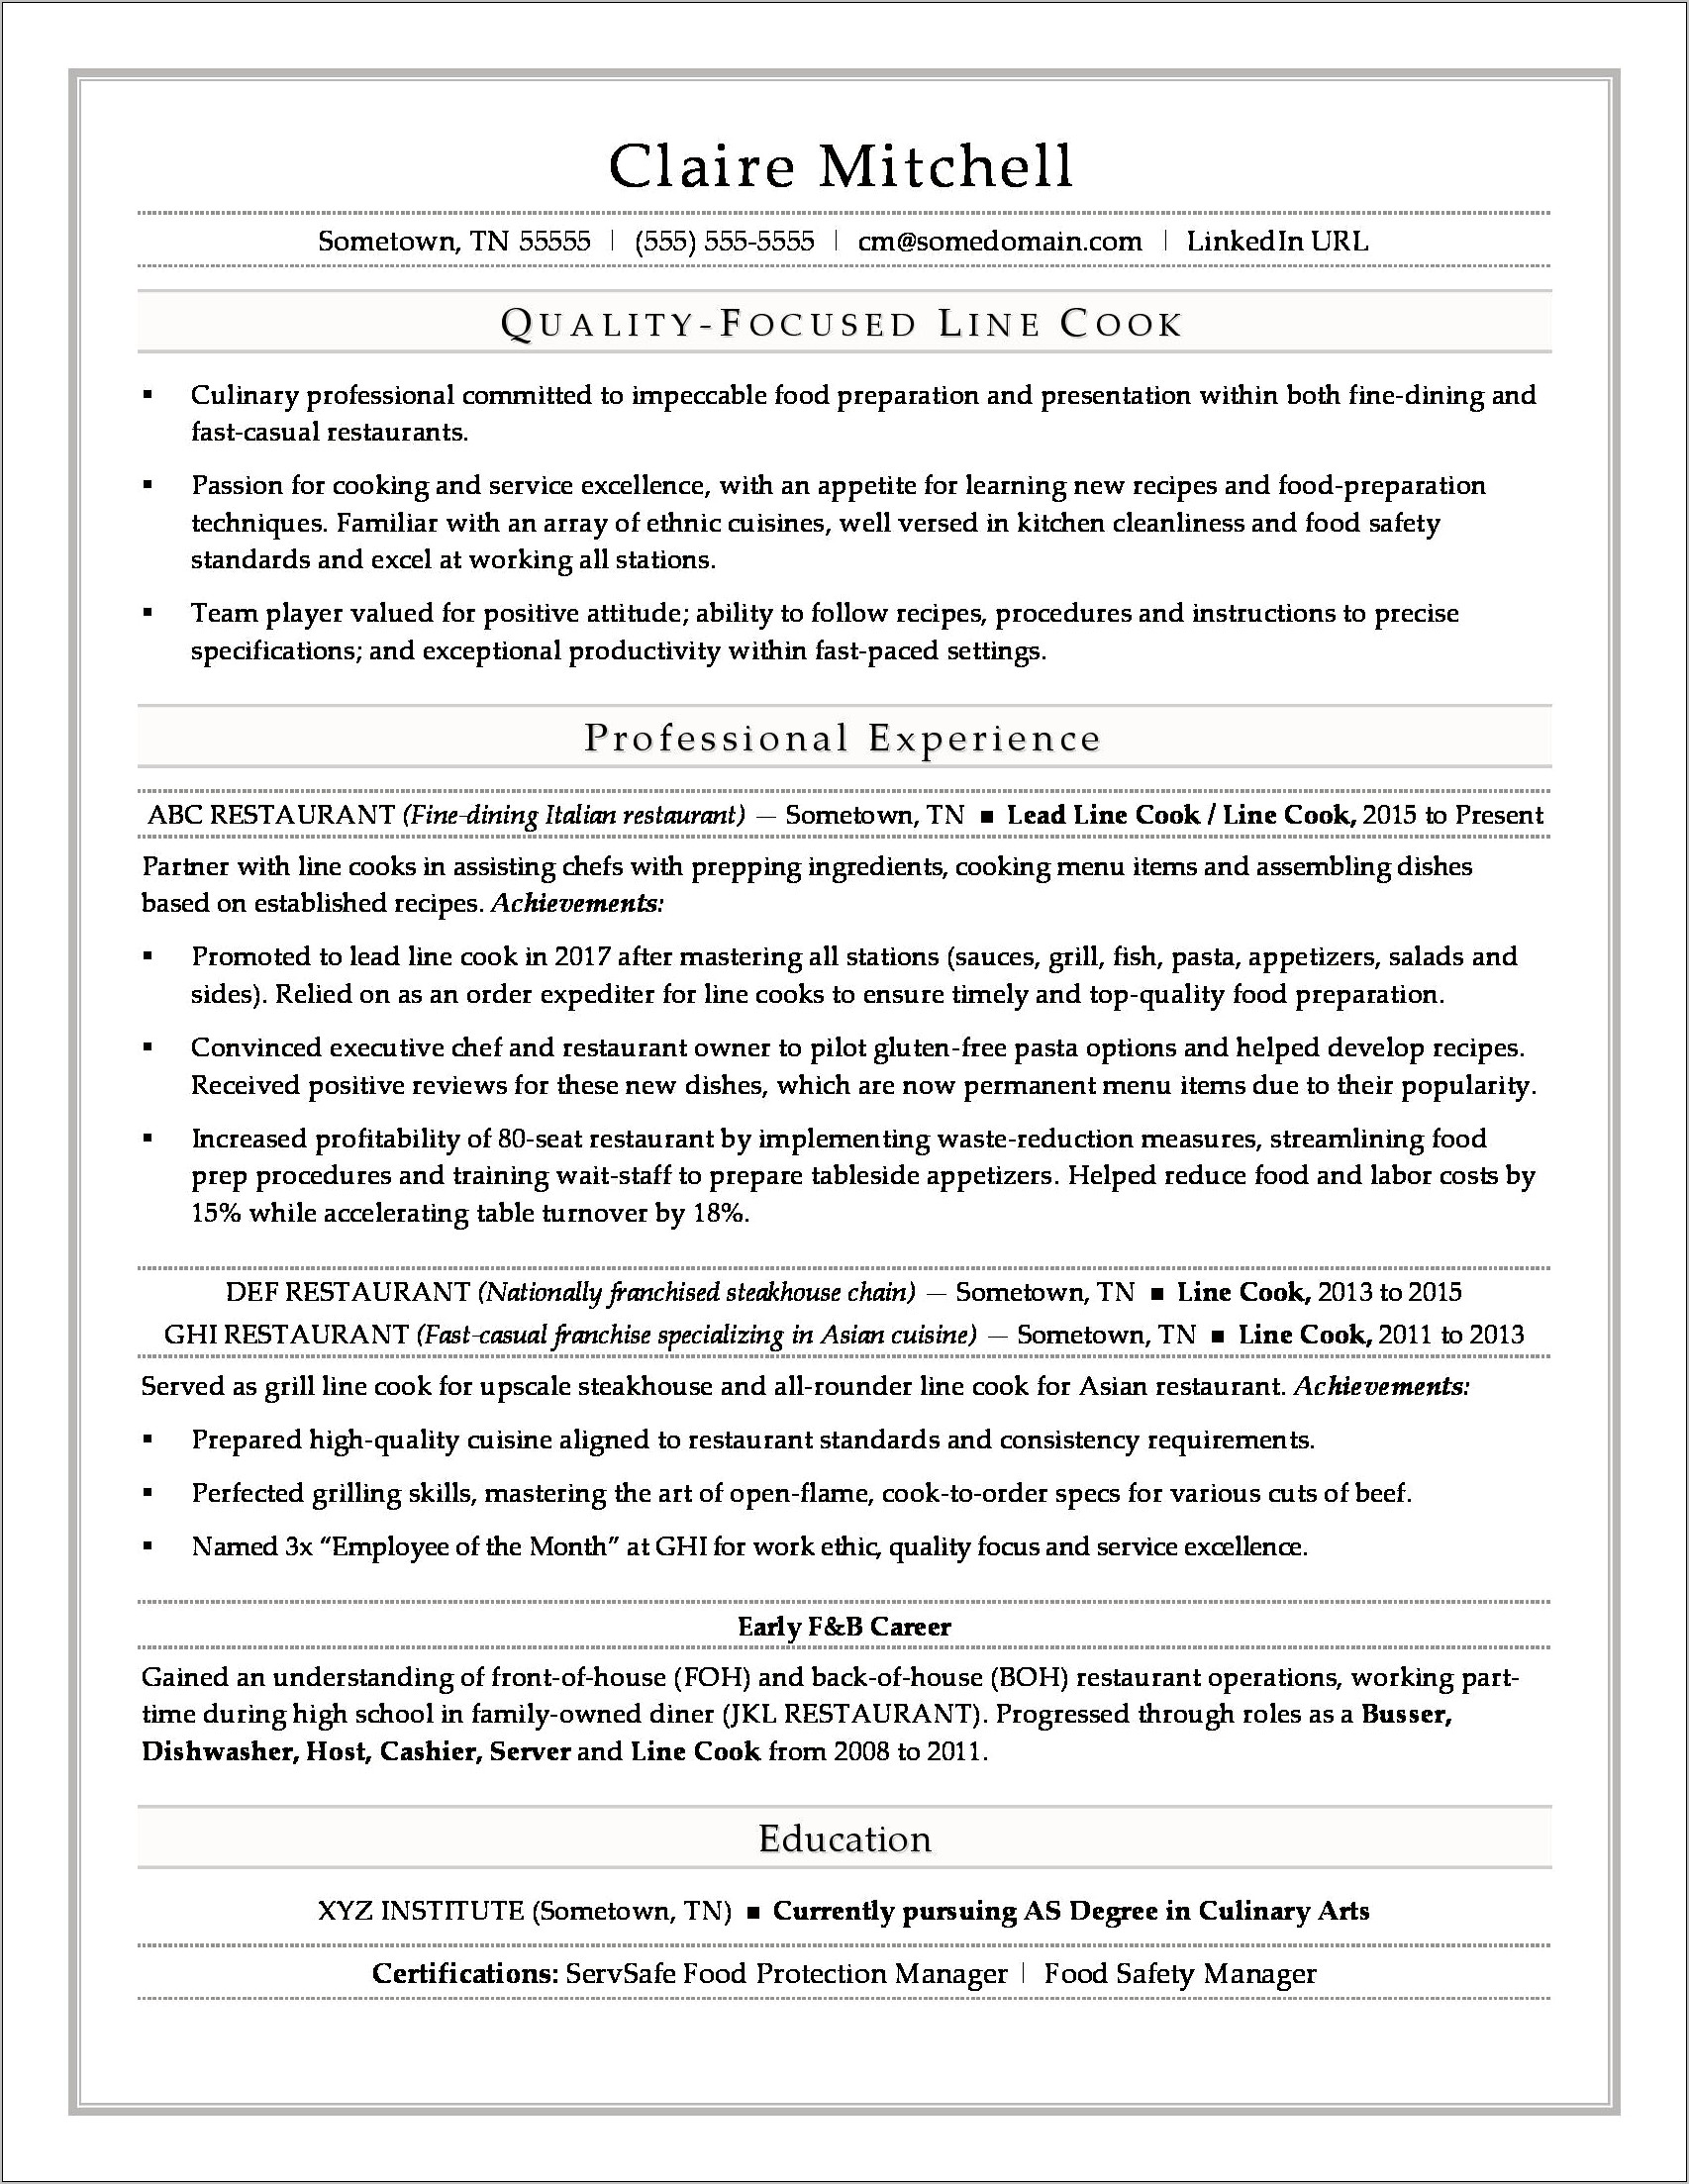 Resume Objective Statement For A Cook